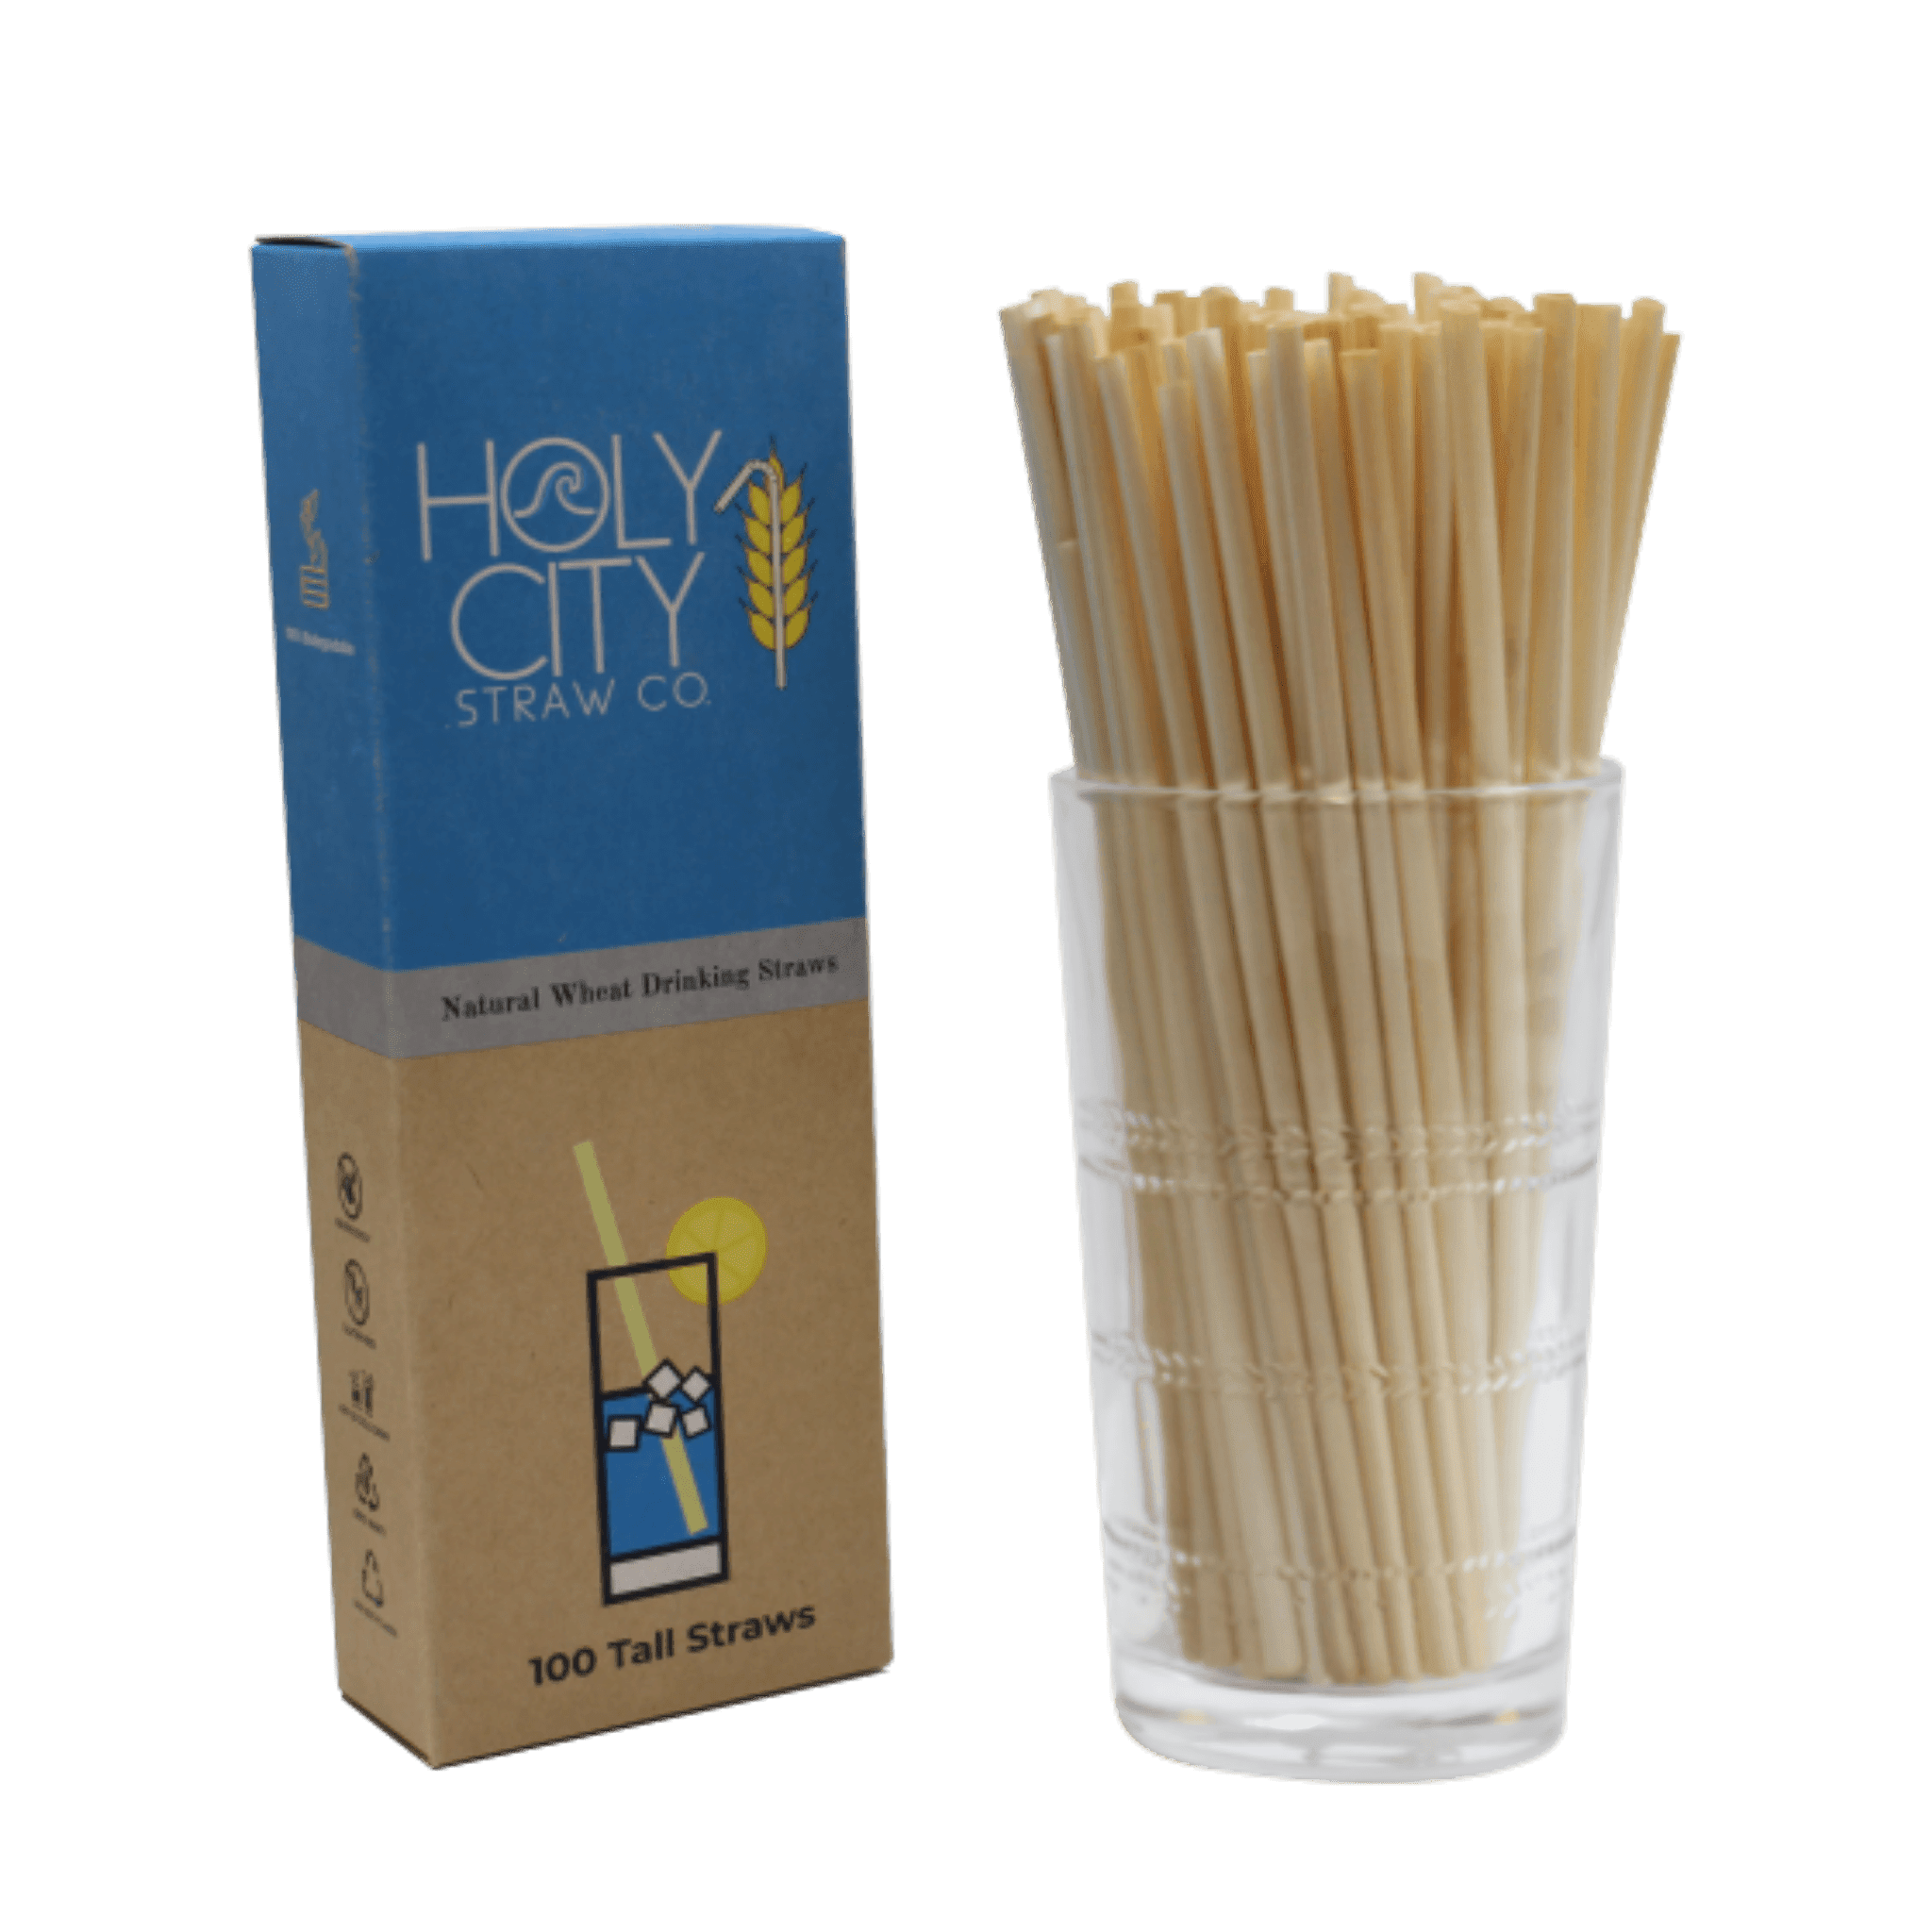 100 count box of Holy City Tall wheat straws next to a cup of straws